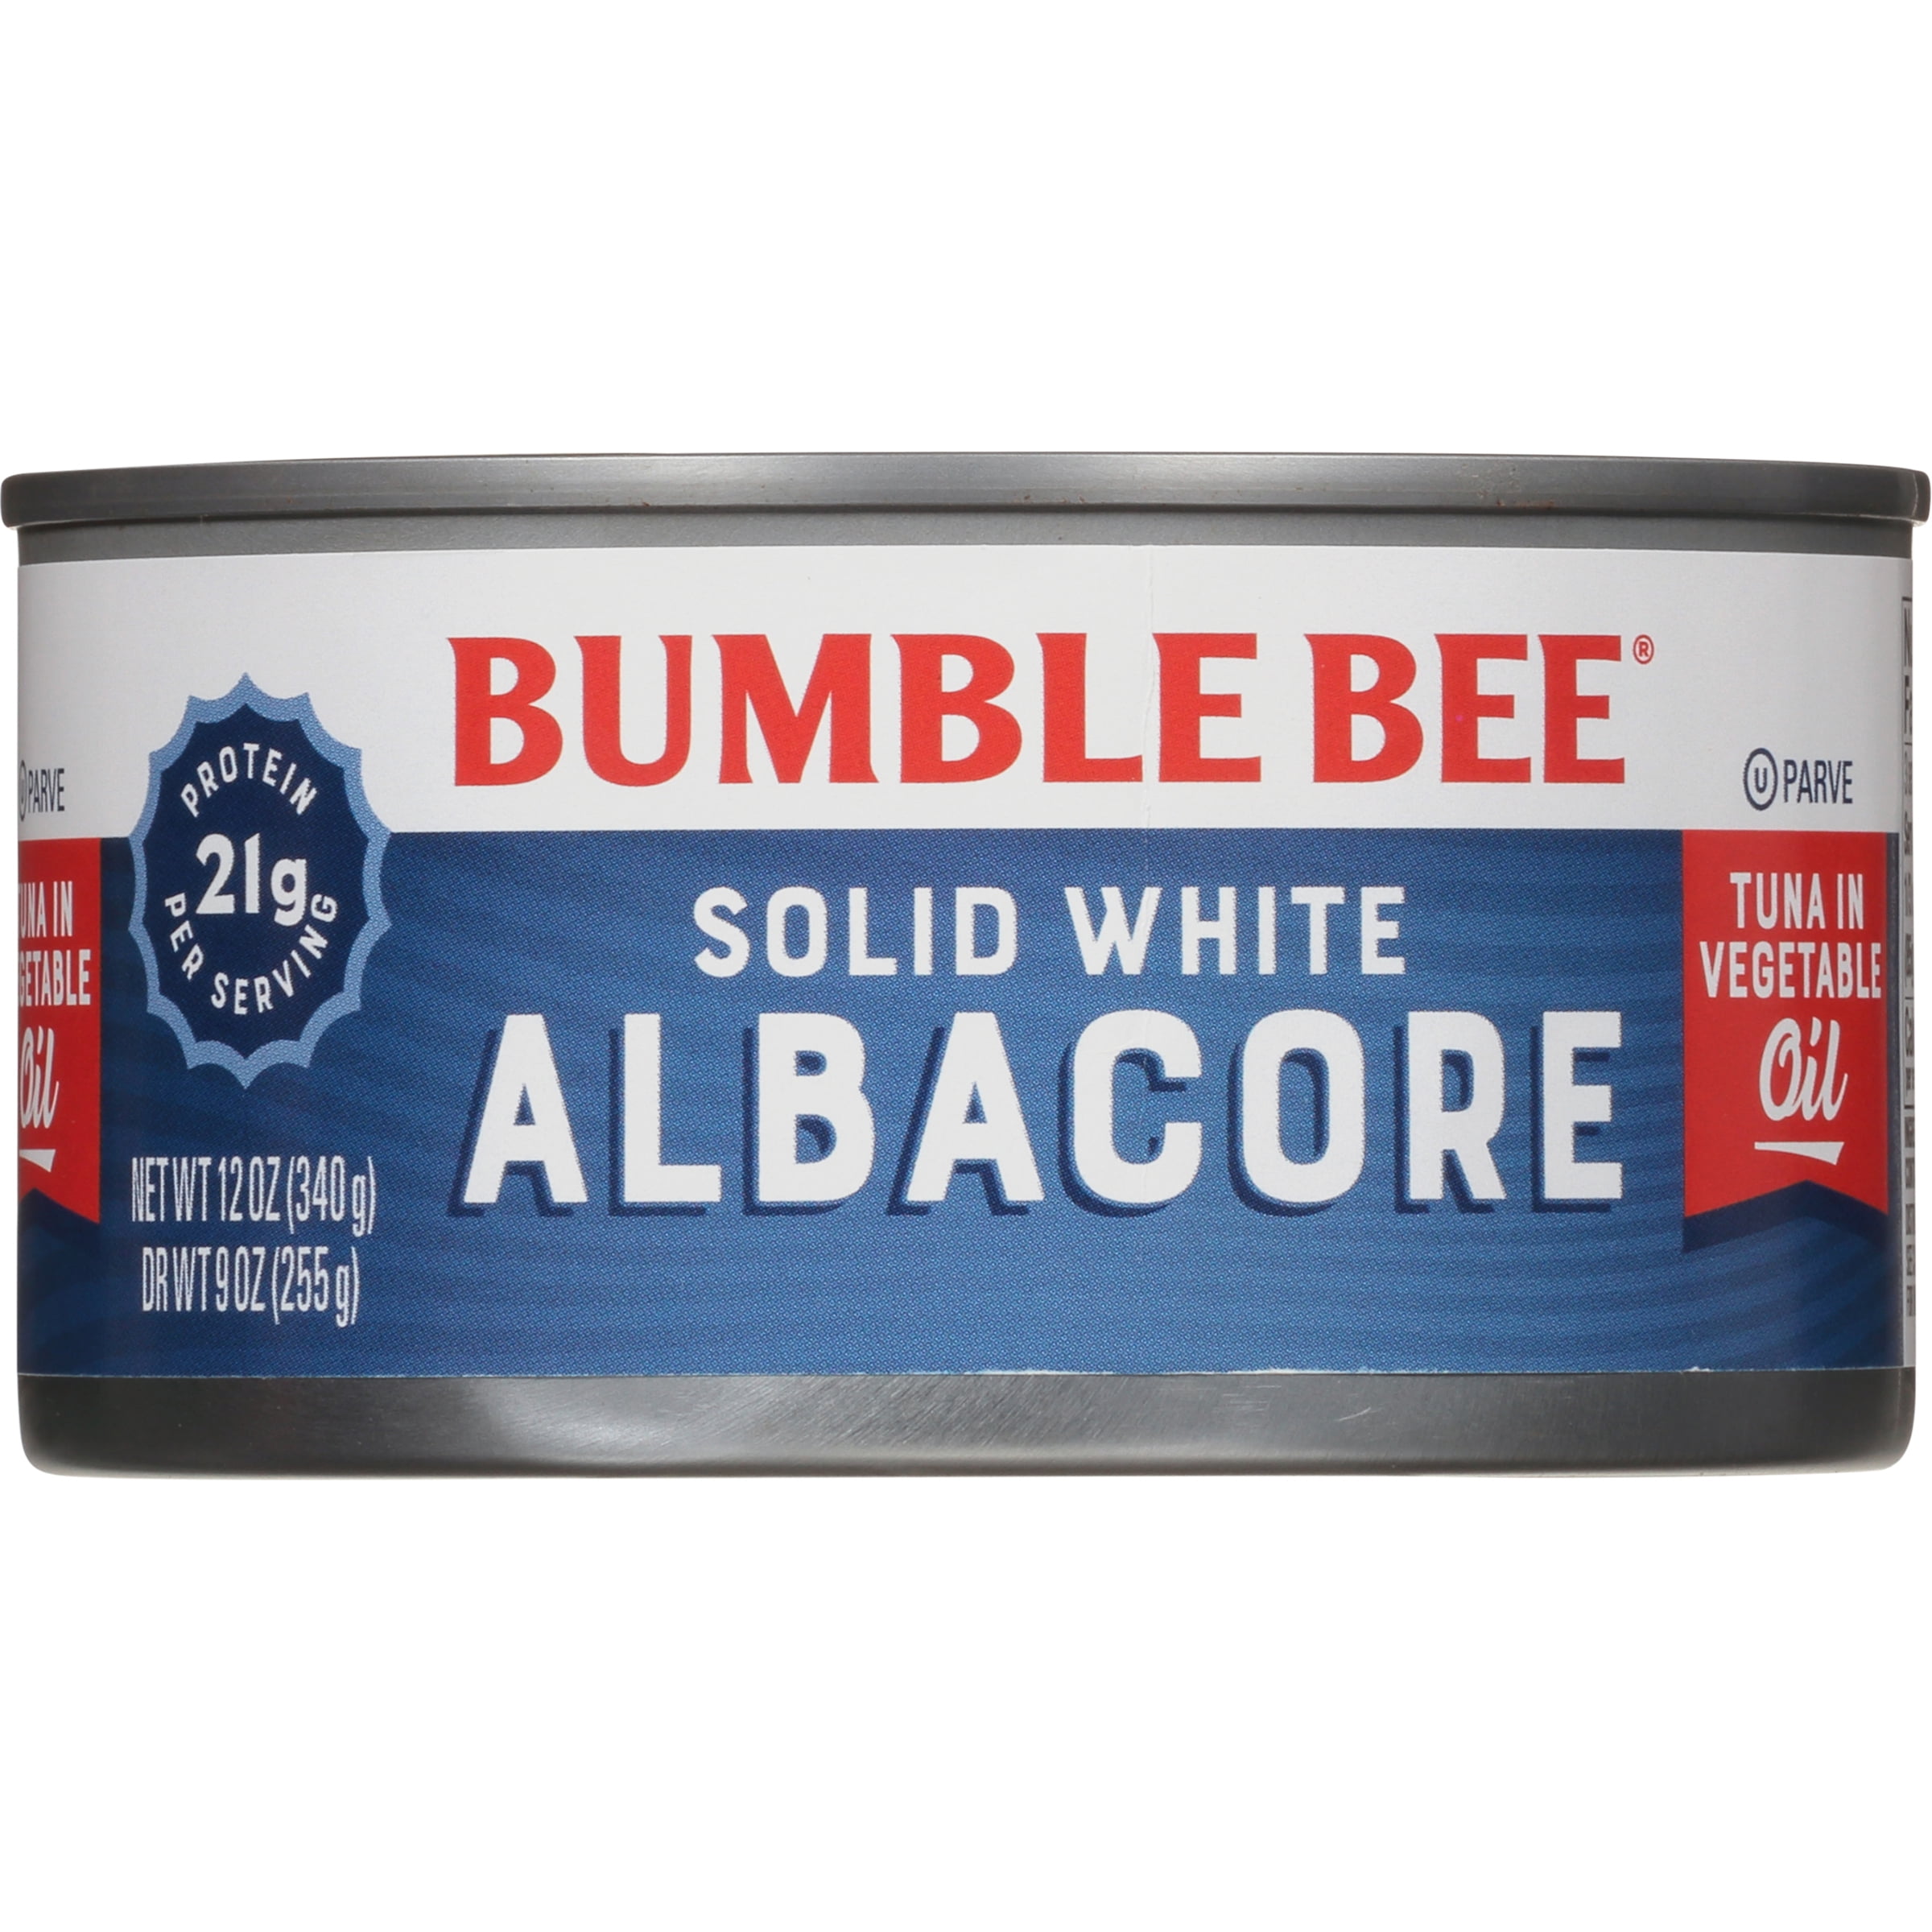 Bumble Bee Solid White Albacore Tuna in Oil, 12 oz can